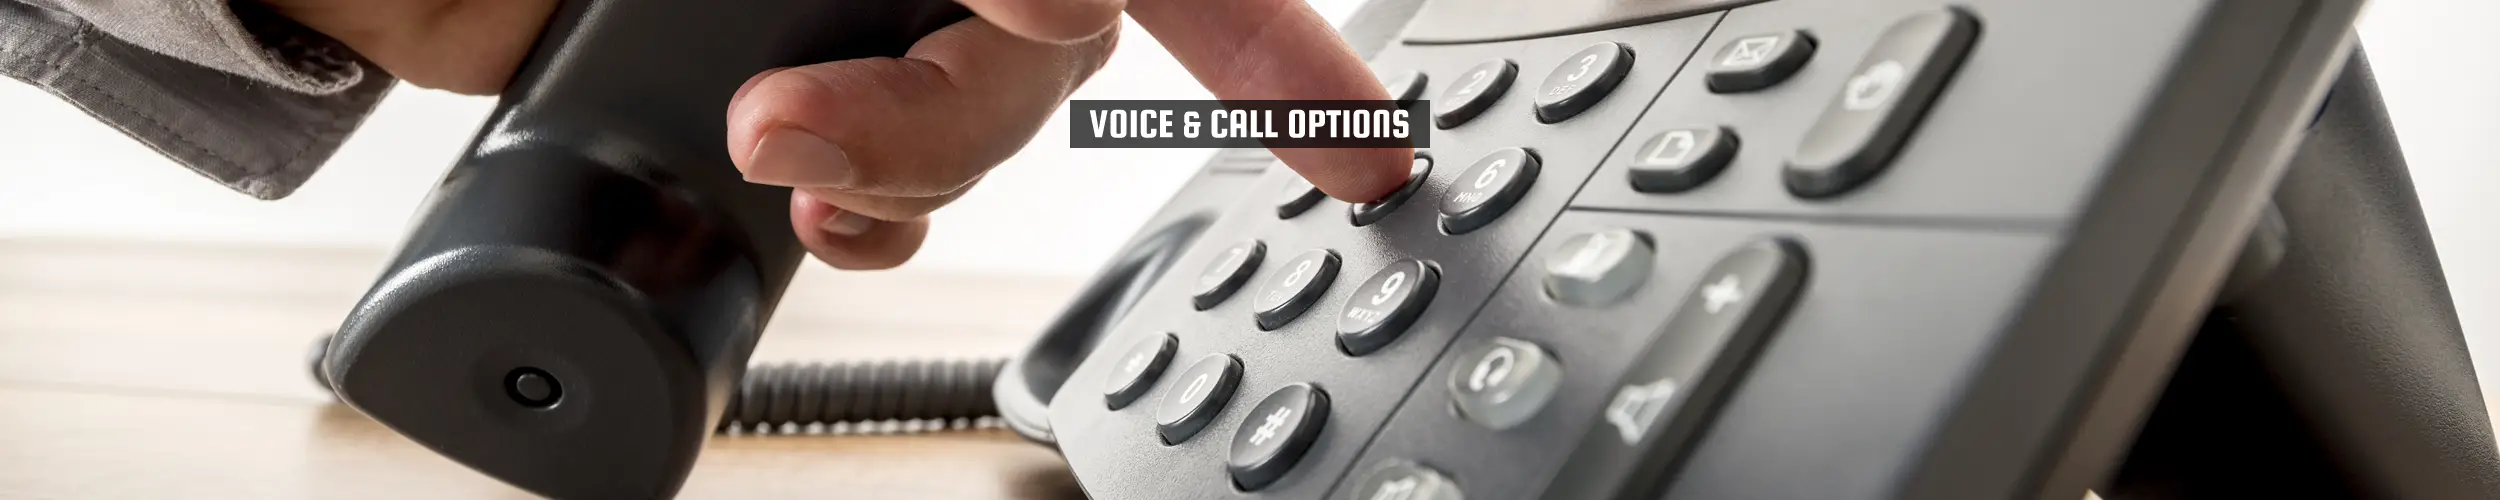 52Degrees Voice - feature image | "voice & call options" | a man keys in the numbers on a telephone | Telecoms Solutions, Norwich